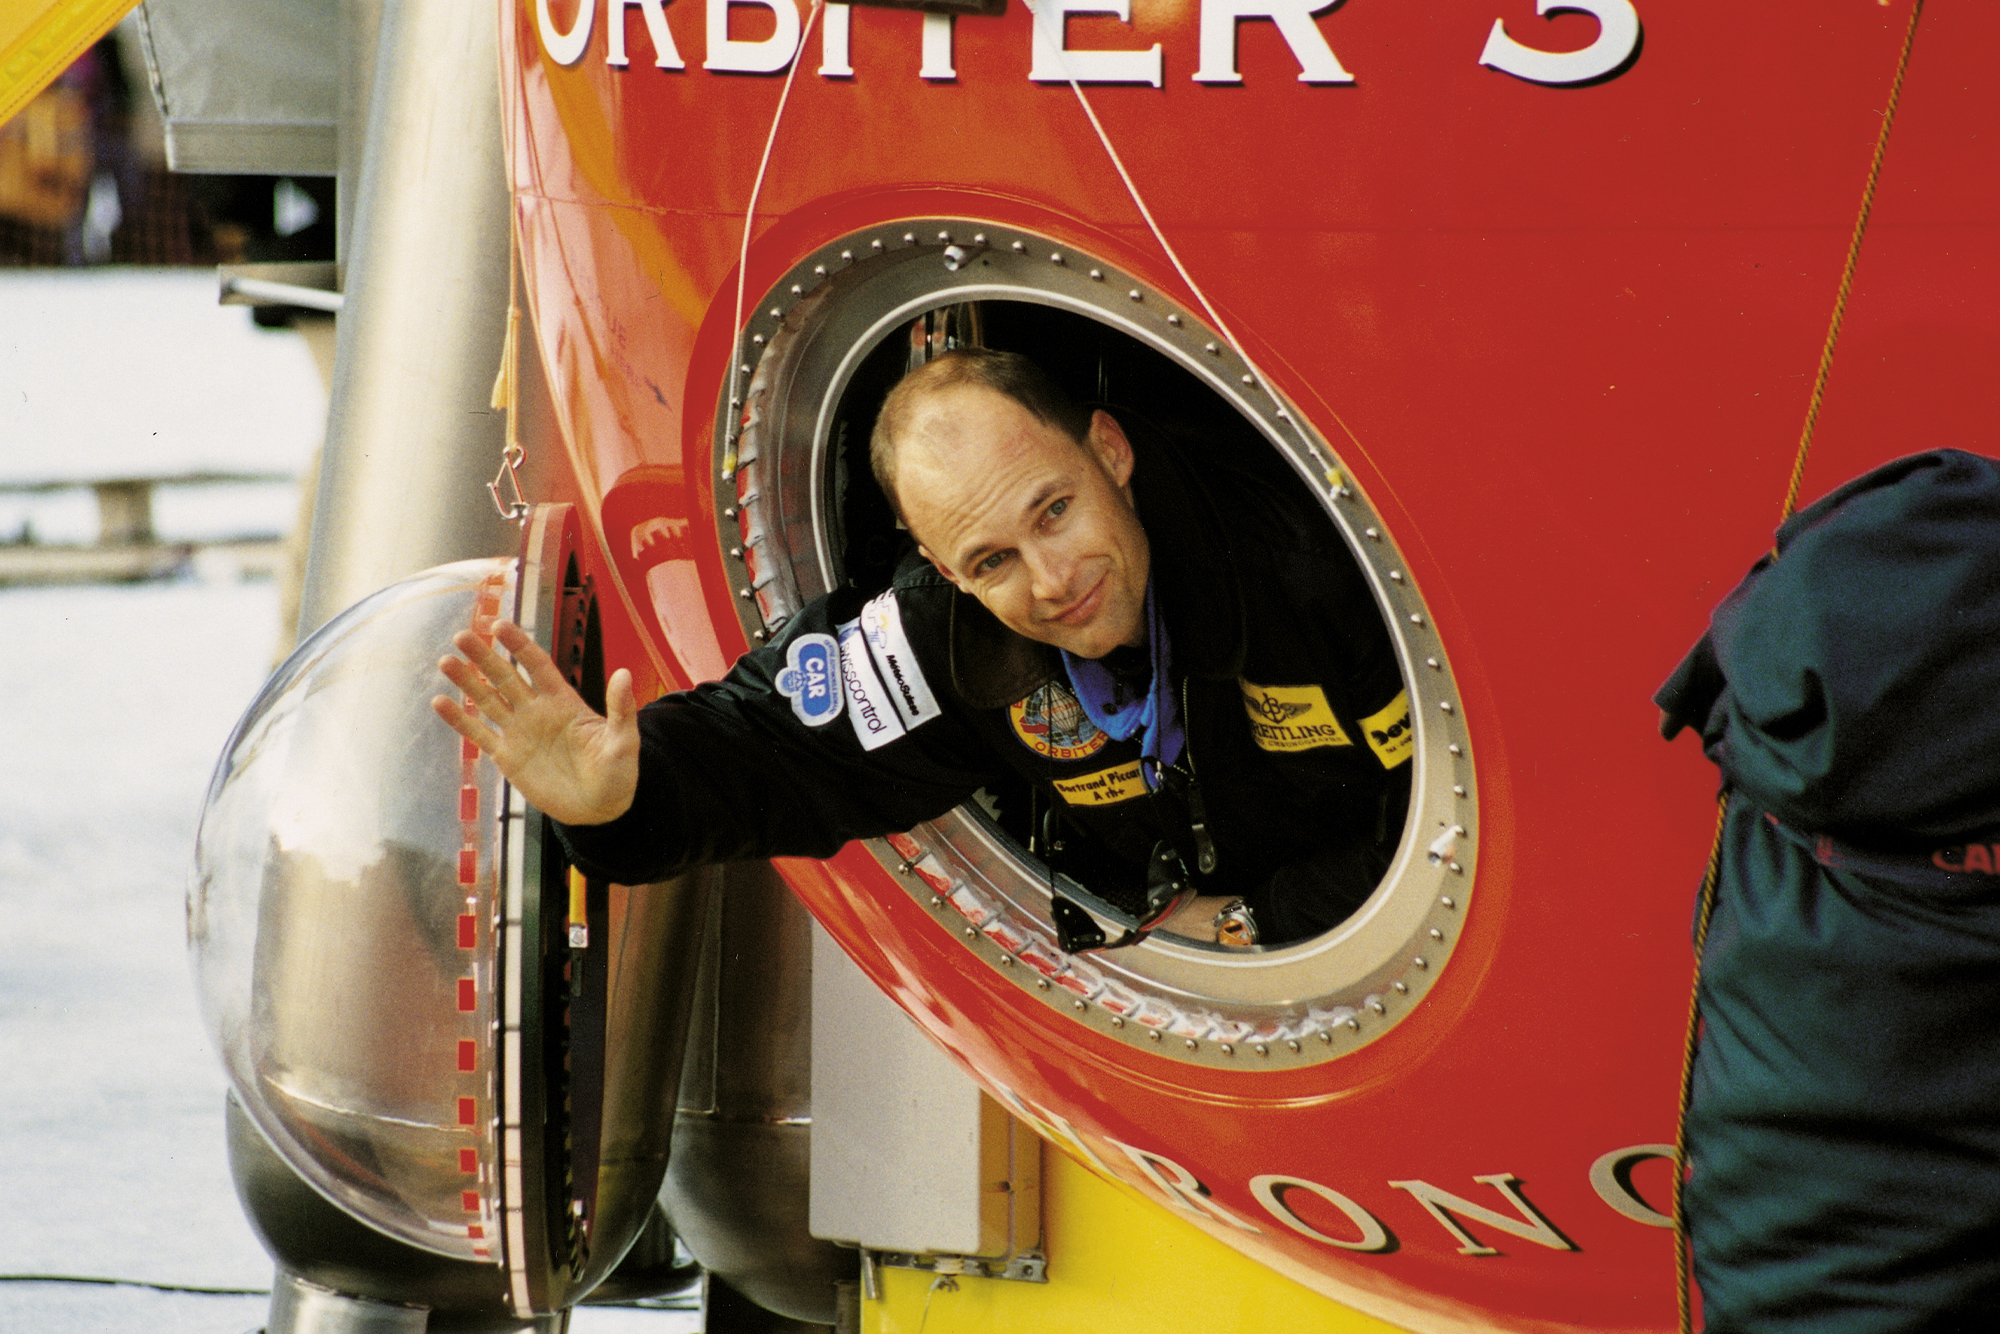 Swiss explorer and climate advocate Bertrand Piccard